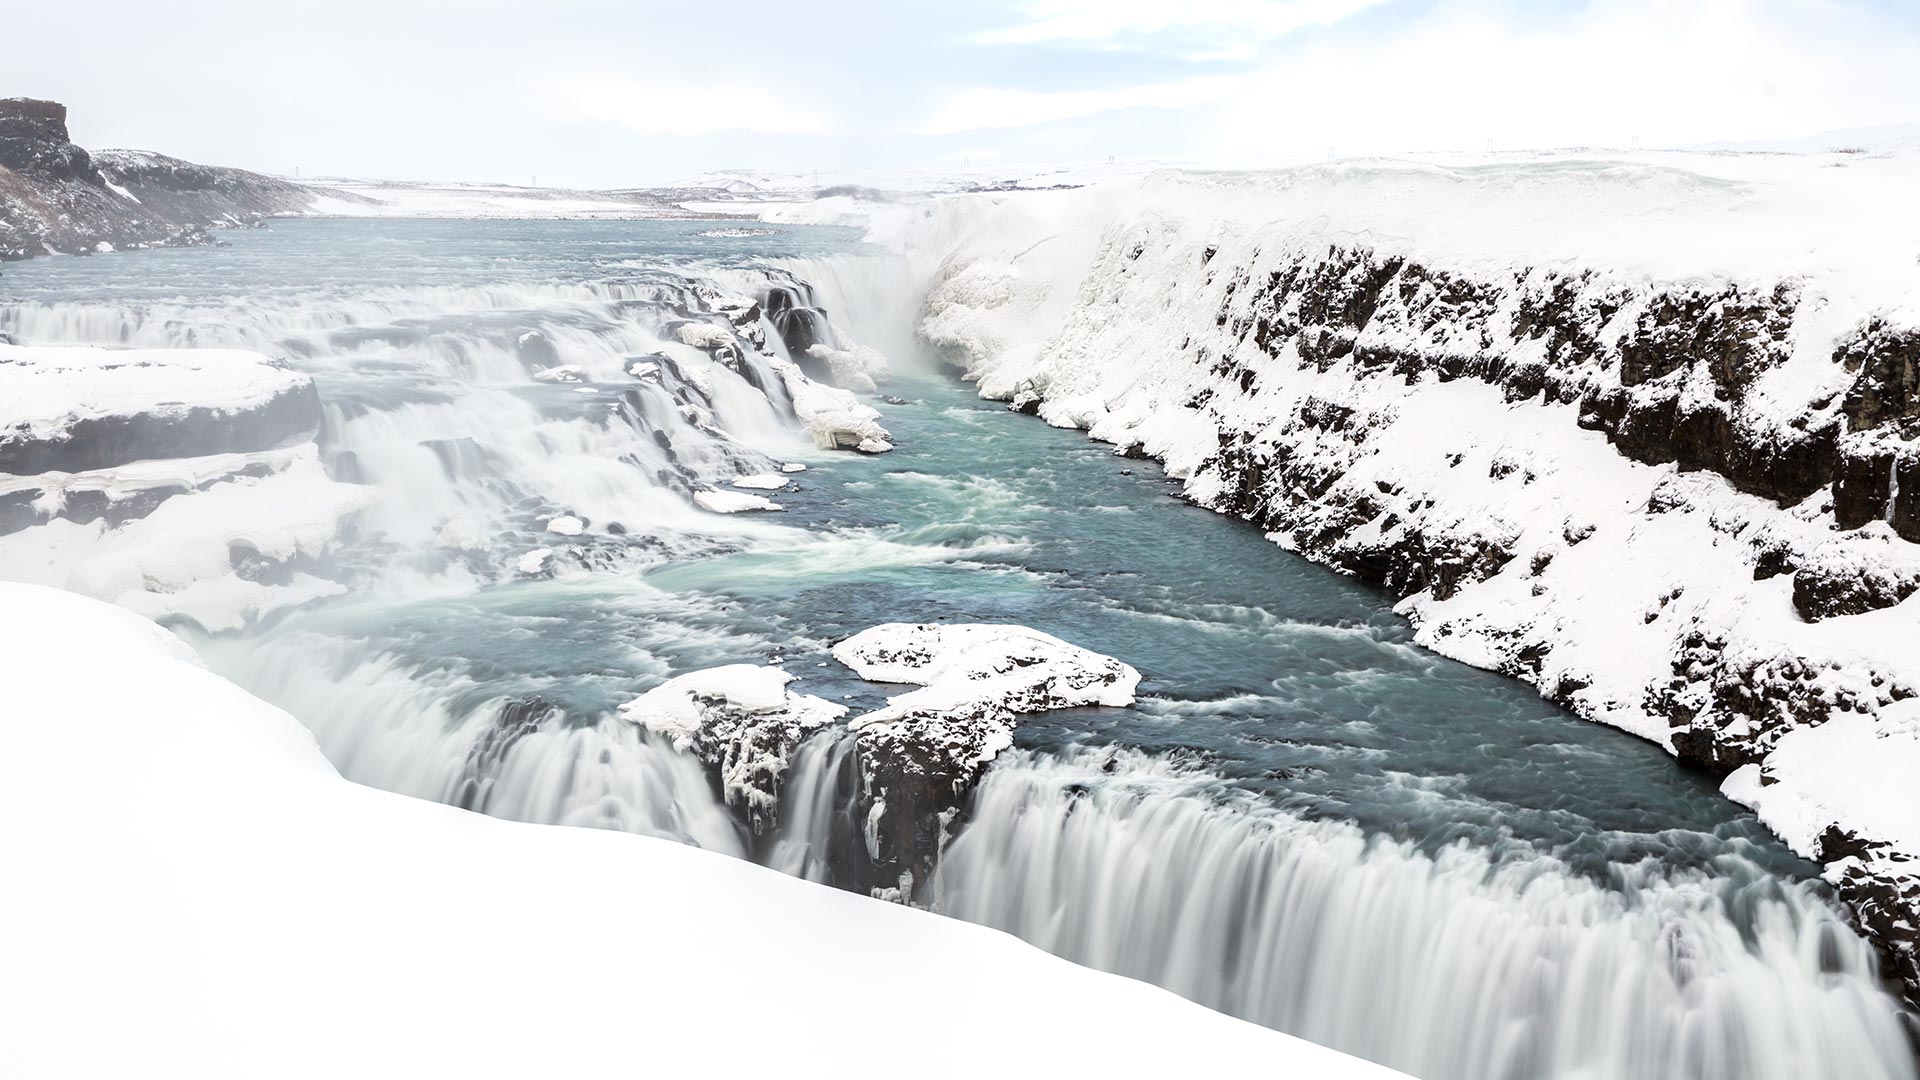 Gullfoss waterfall in the snow, Iceland